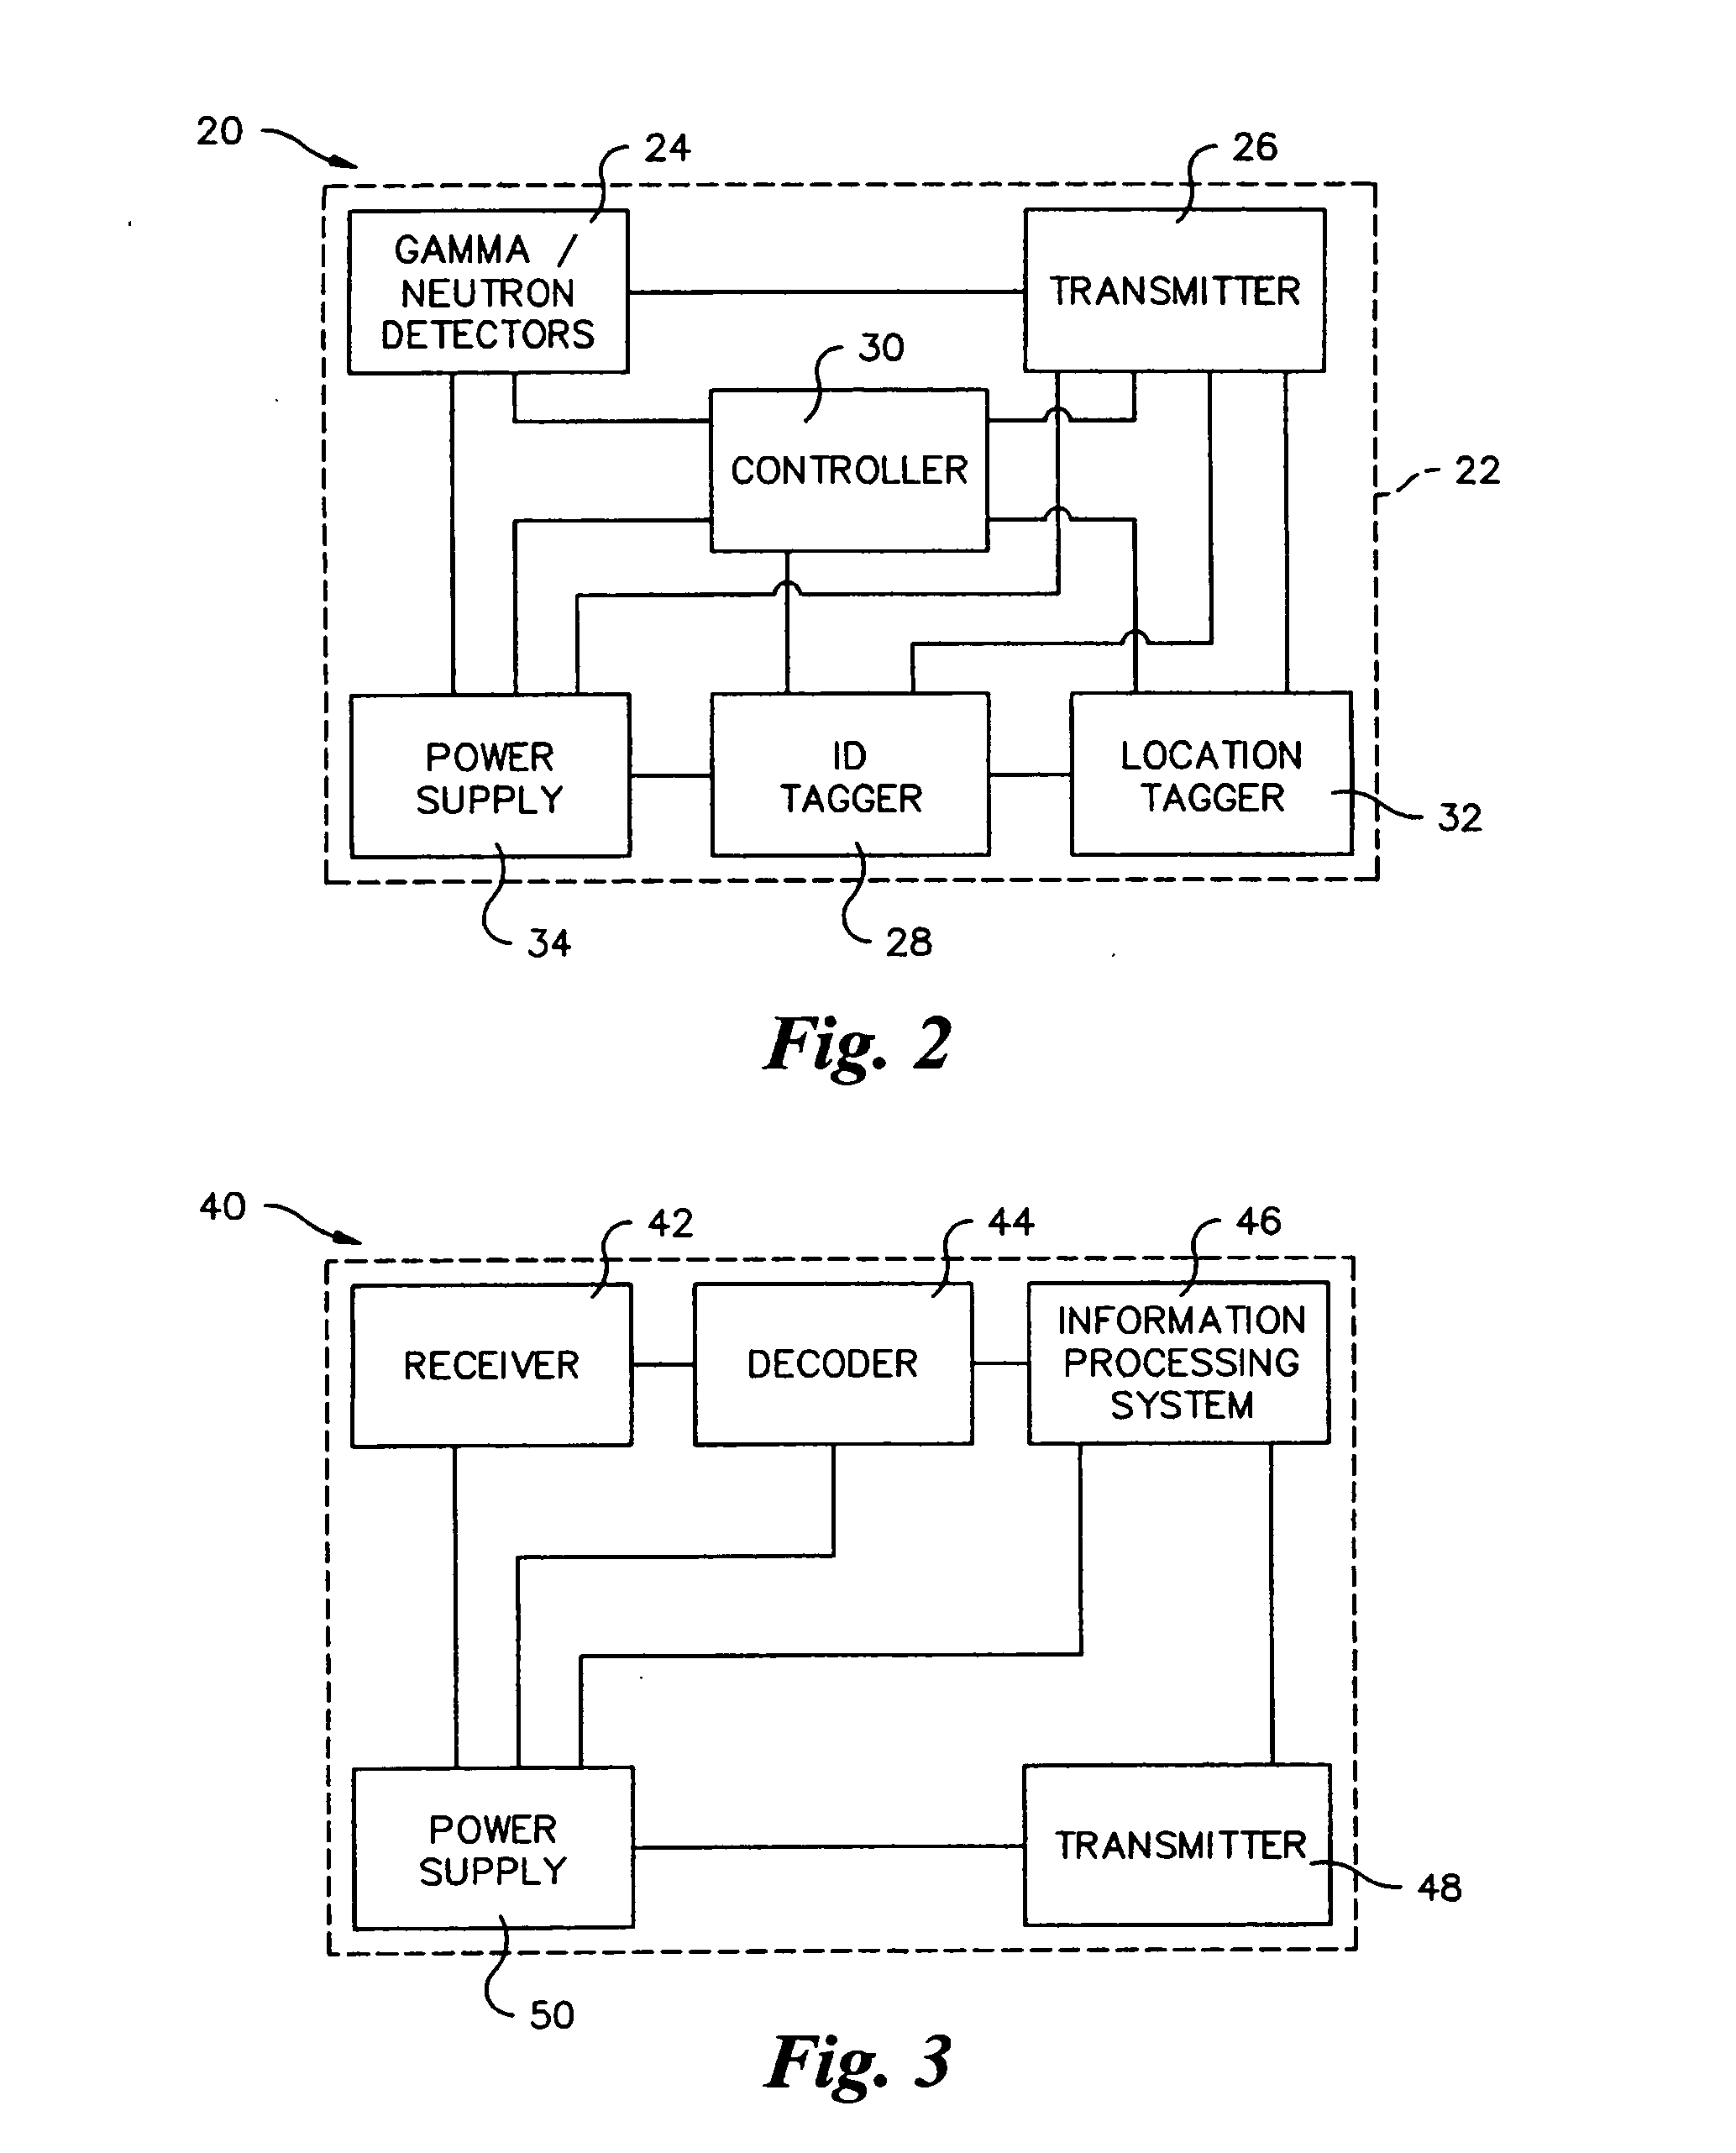 Method and apparatus for detection of radioactive material